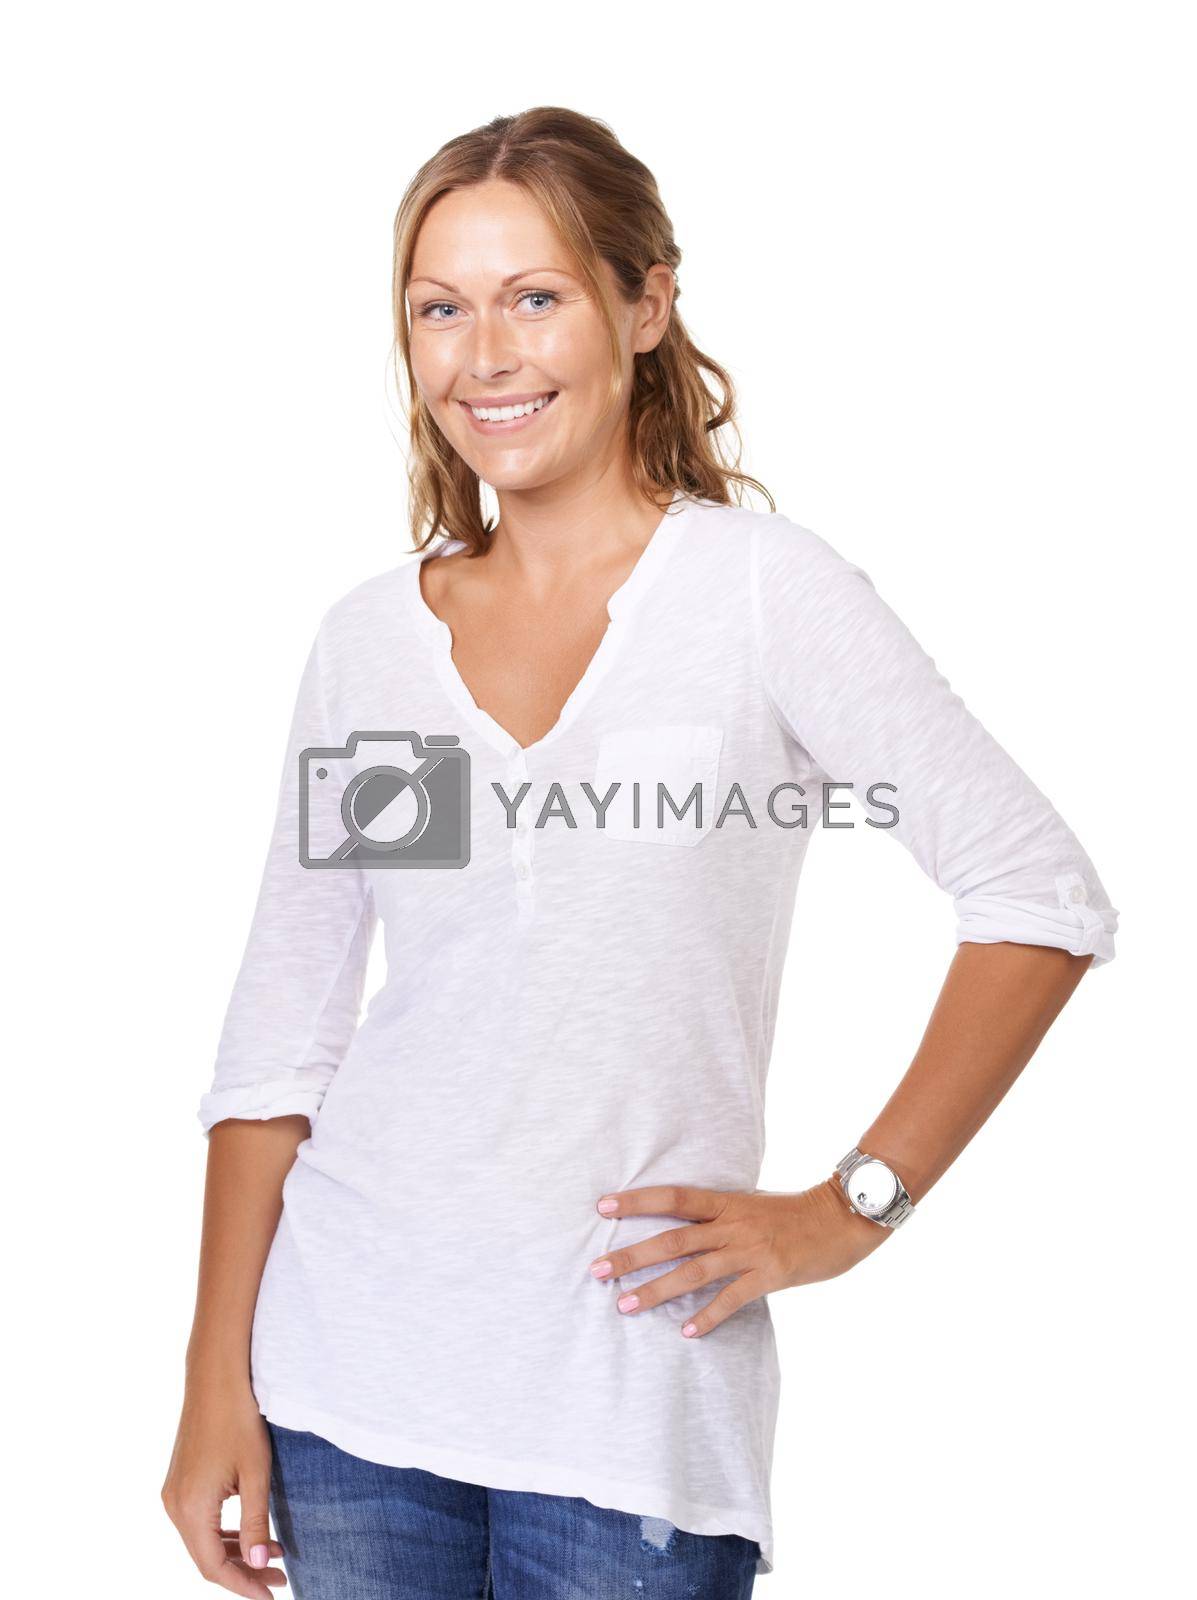 Royalty free image of She has a relaxed attitude toward life. A happy young woman standing with her hand on her hip against a white background. by YuriArcurs